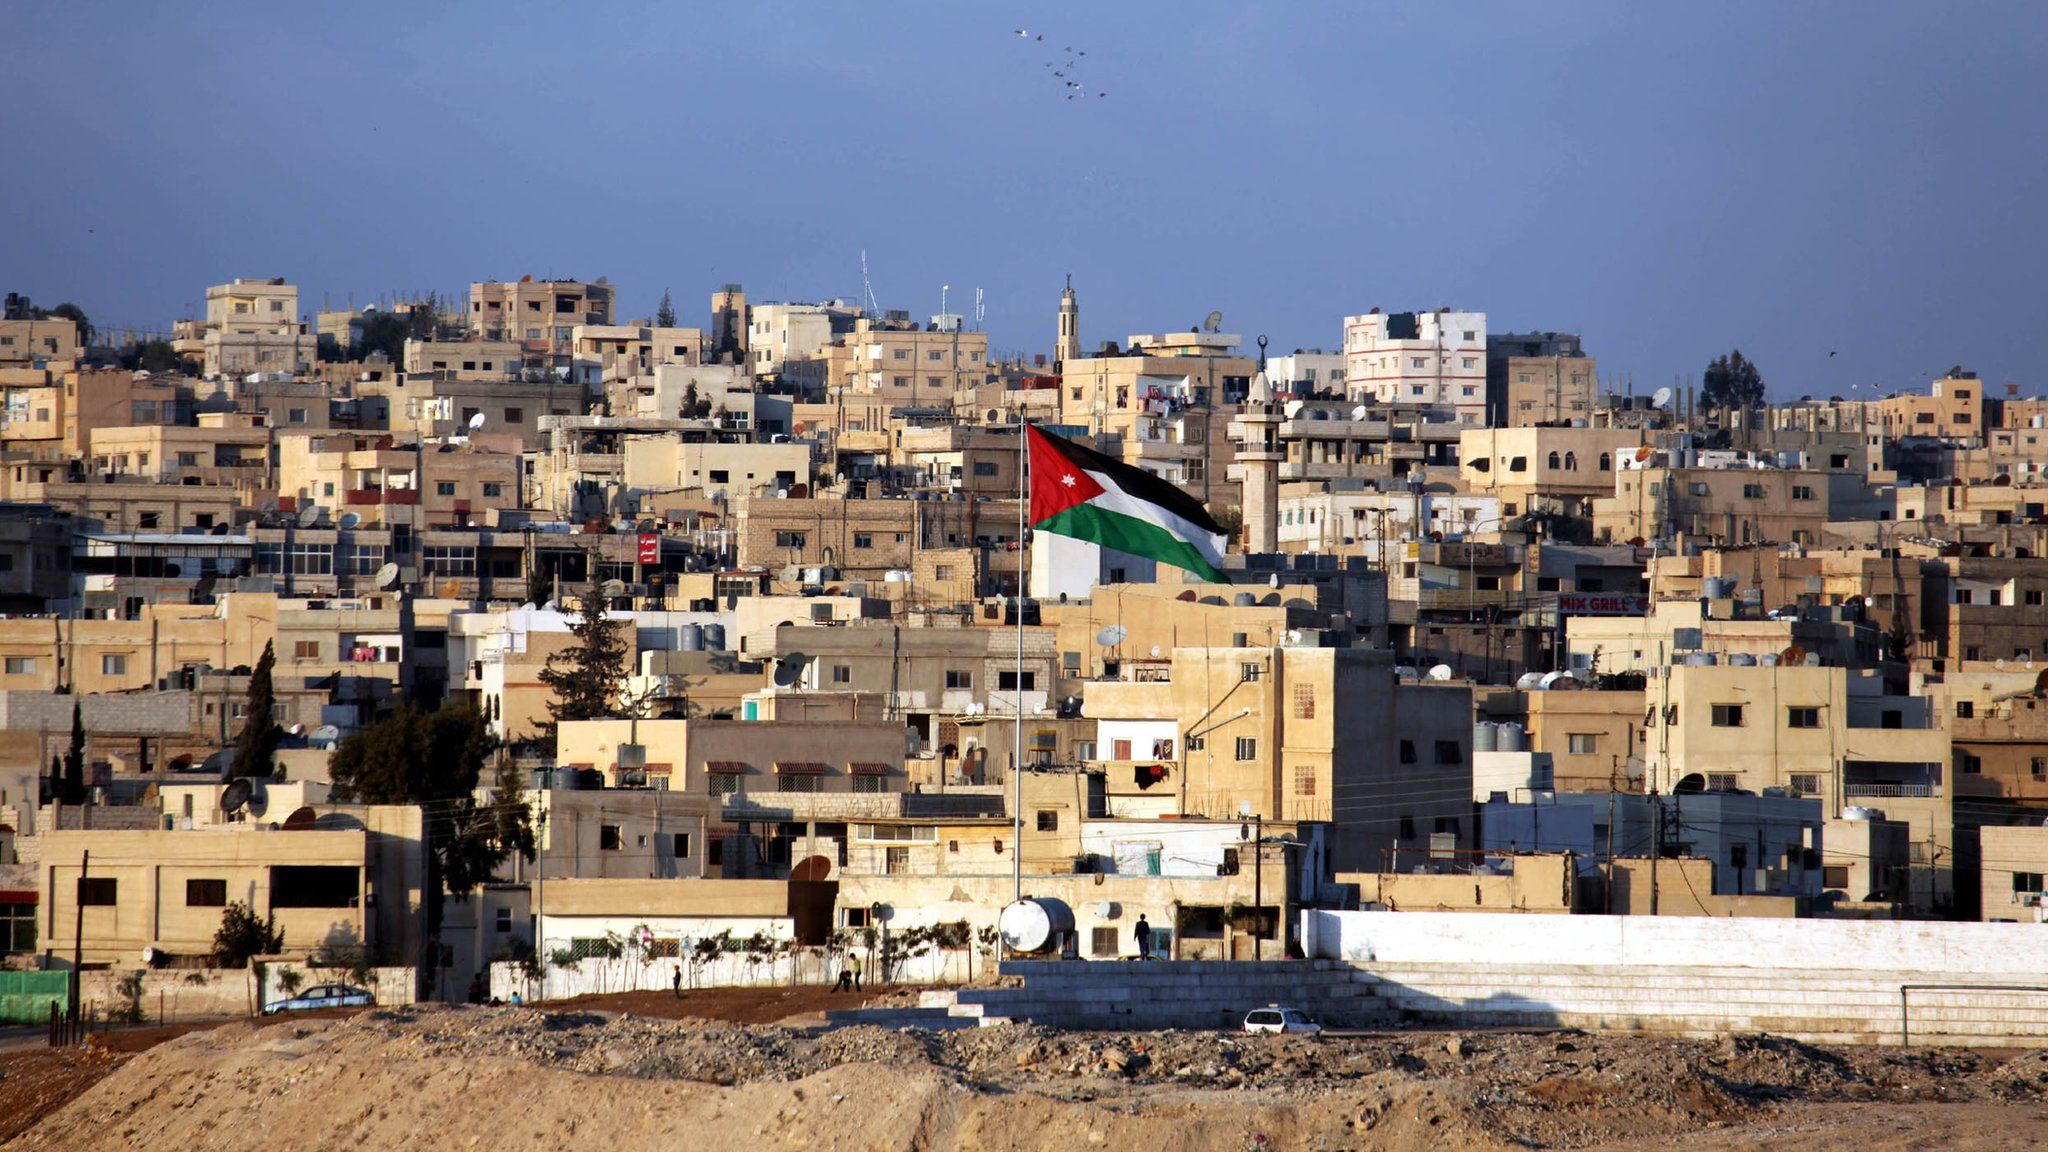 File photo from 5 January 2010 showing the Jordanian city of Zarqa